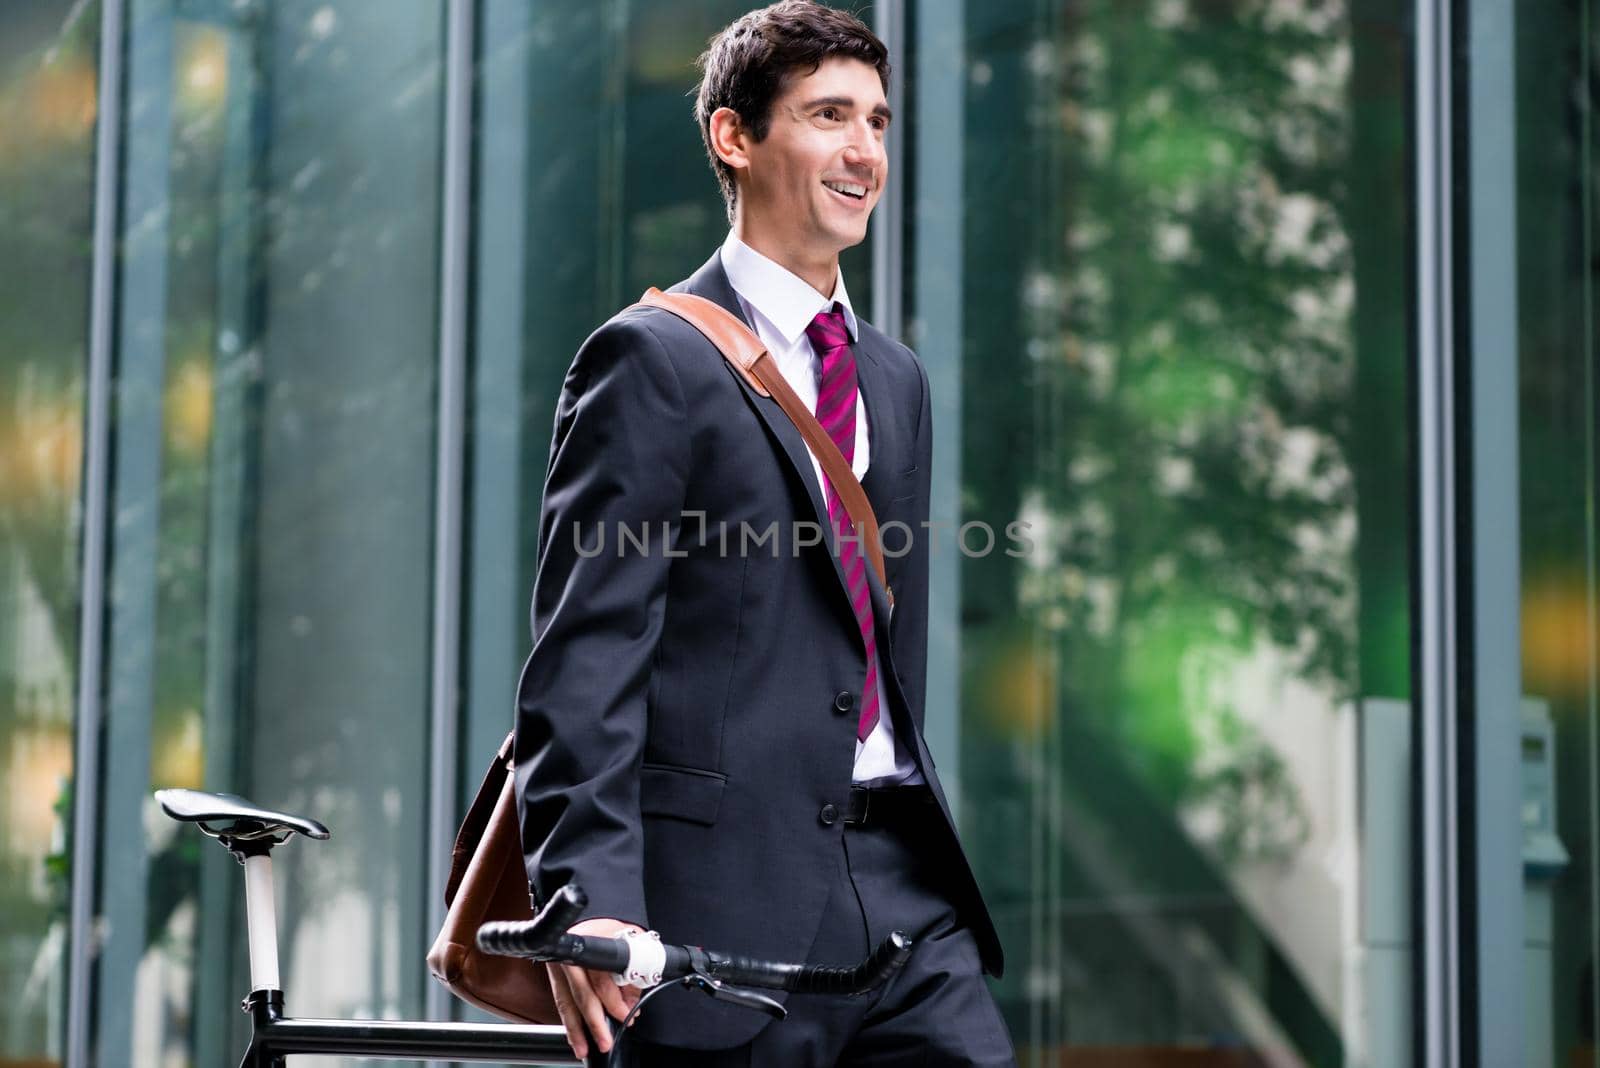 Smiling handsome young business man walking through town with his bike wheeling it along a pedestrian walkway as he commutes to work